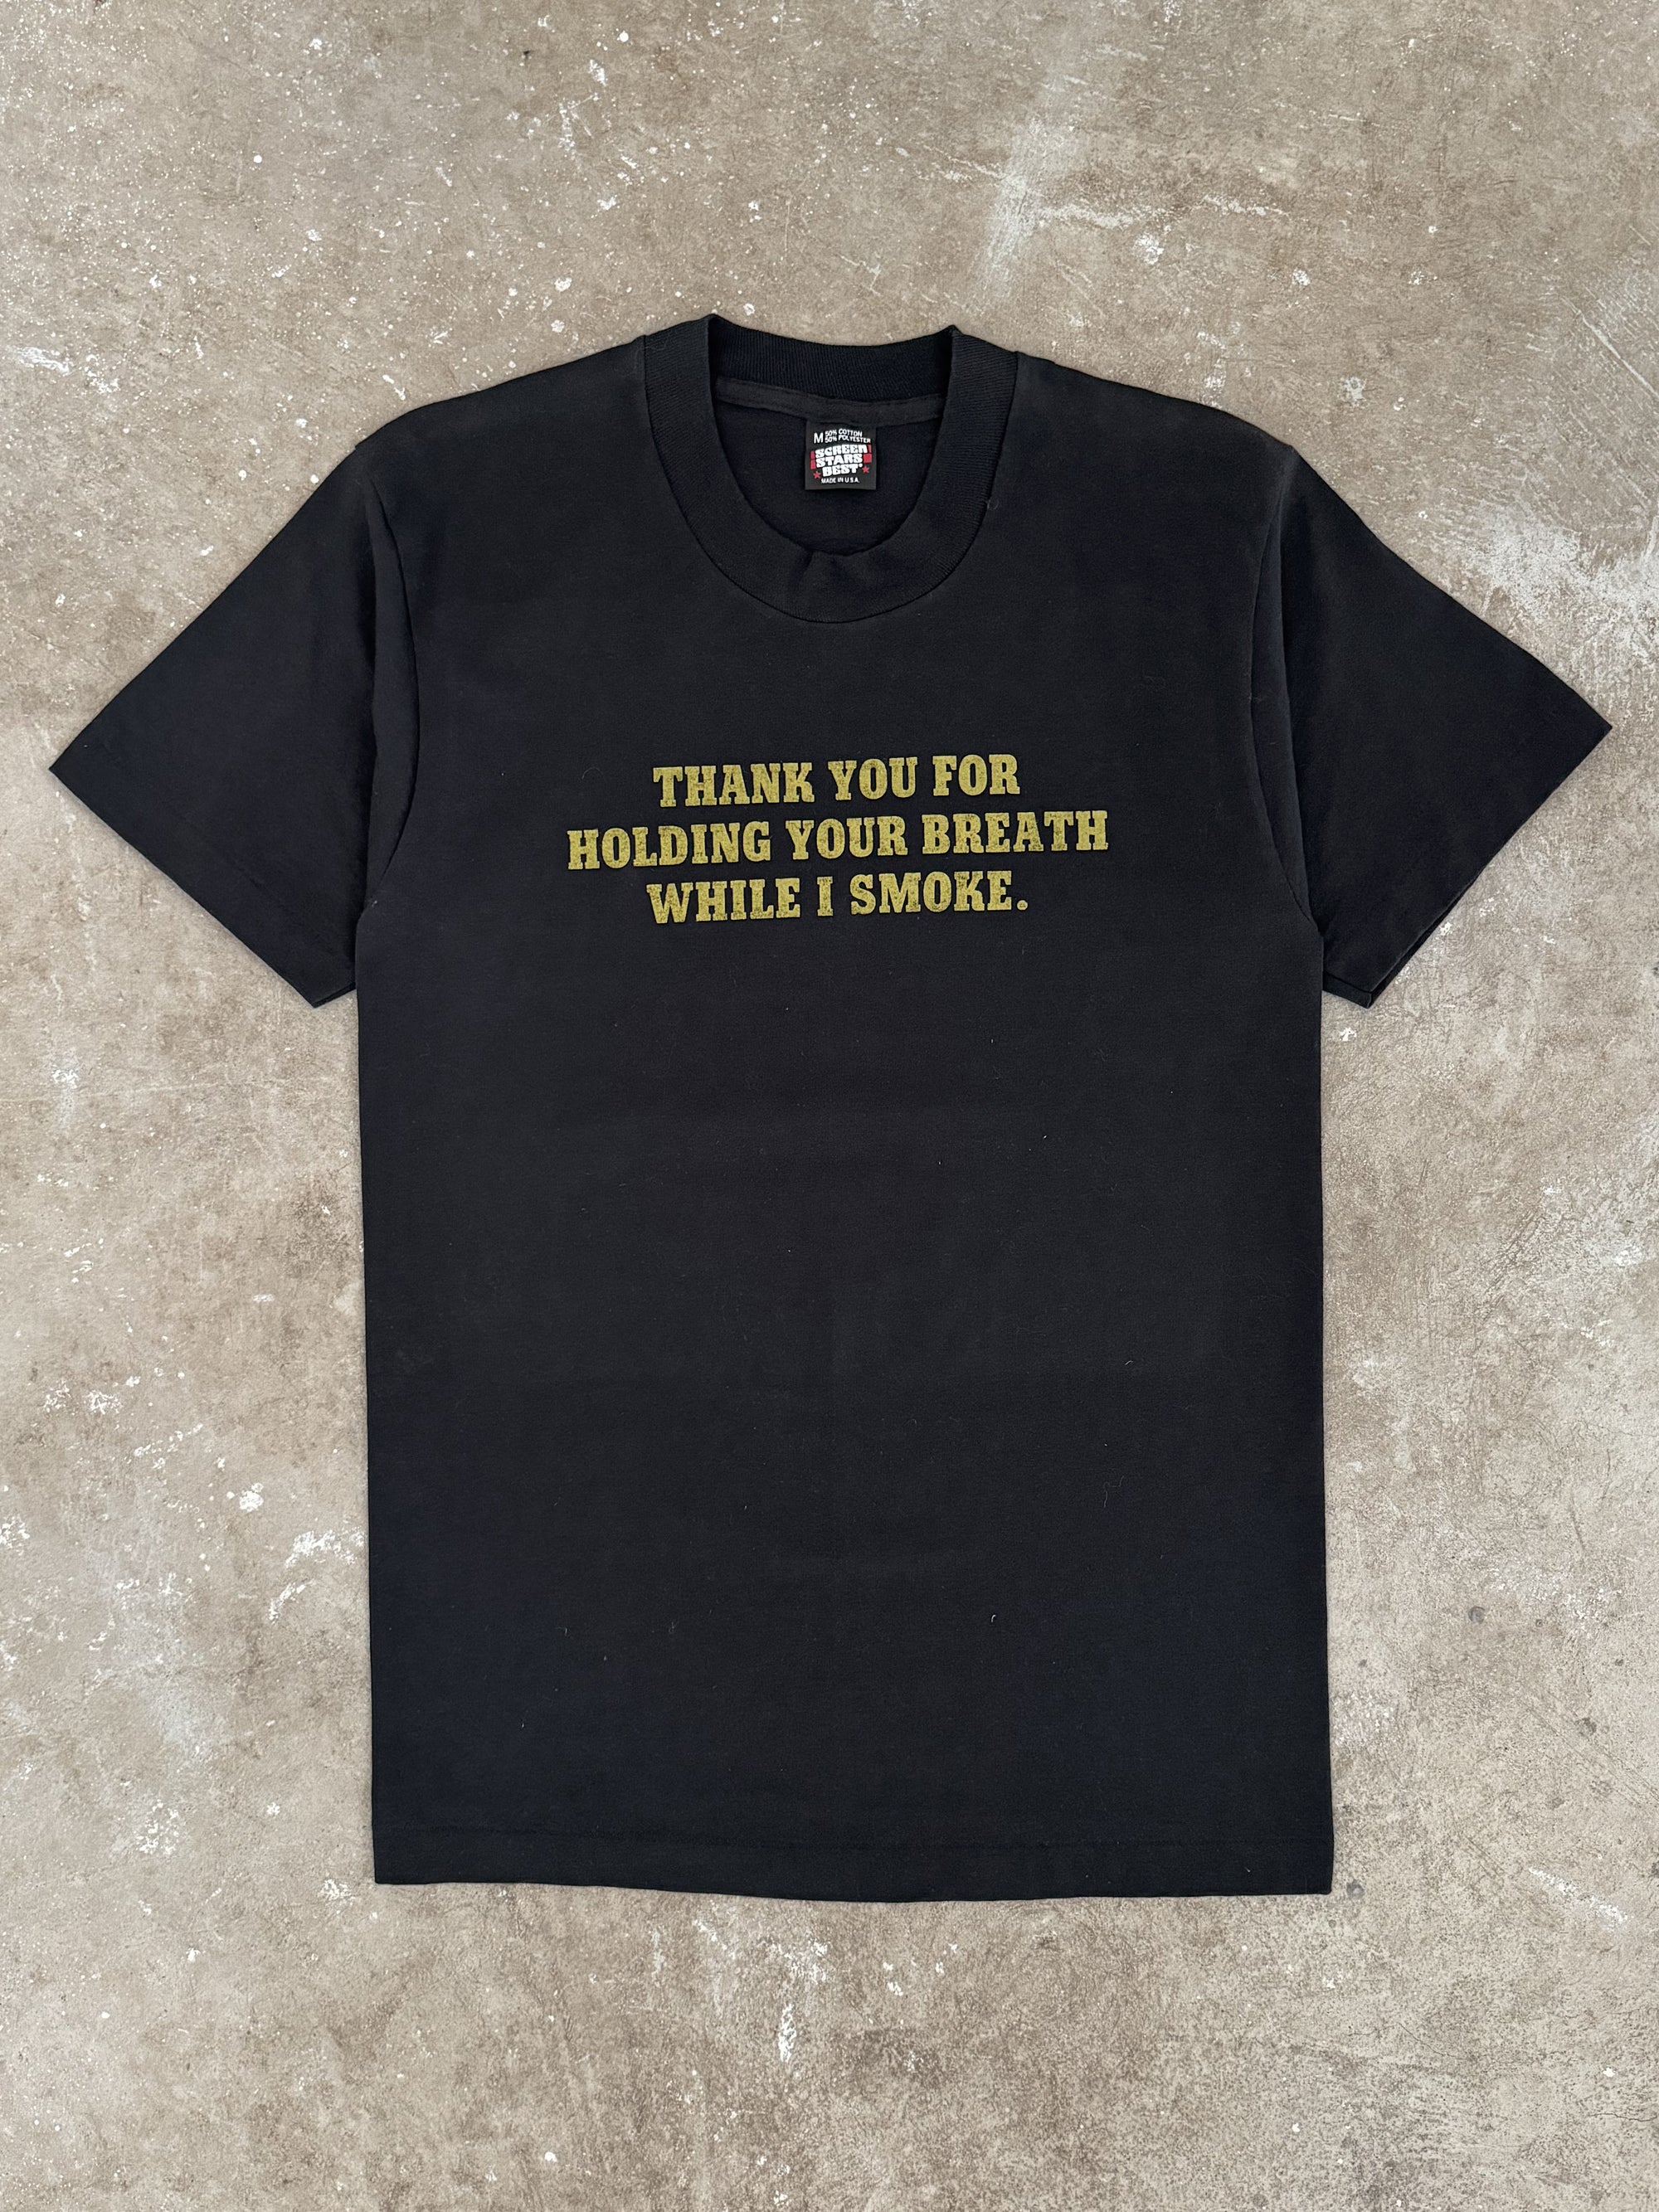 1980s/90s "Thank Your For Holding Your Breath While I Smoke" Tee (S)